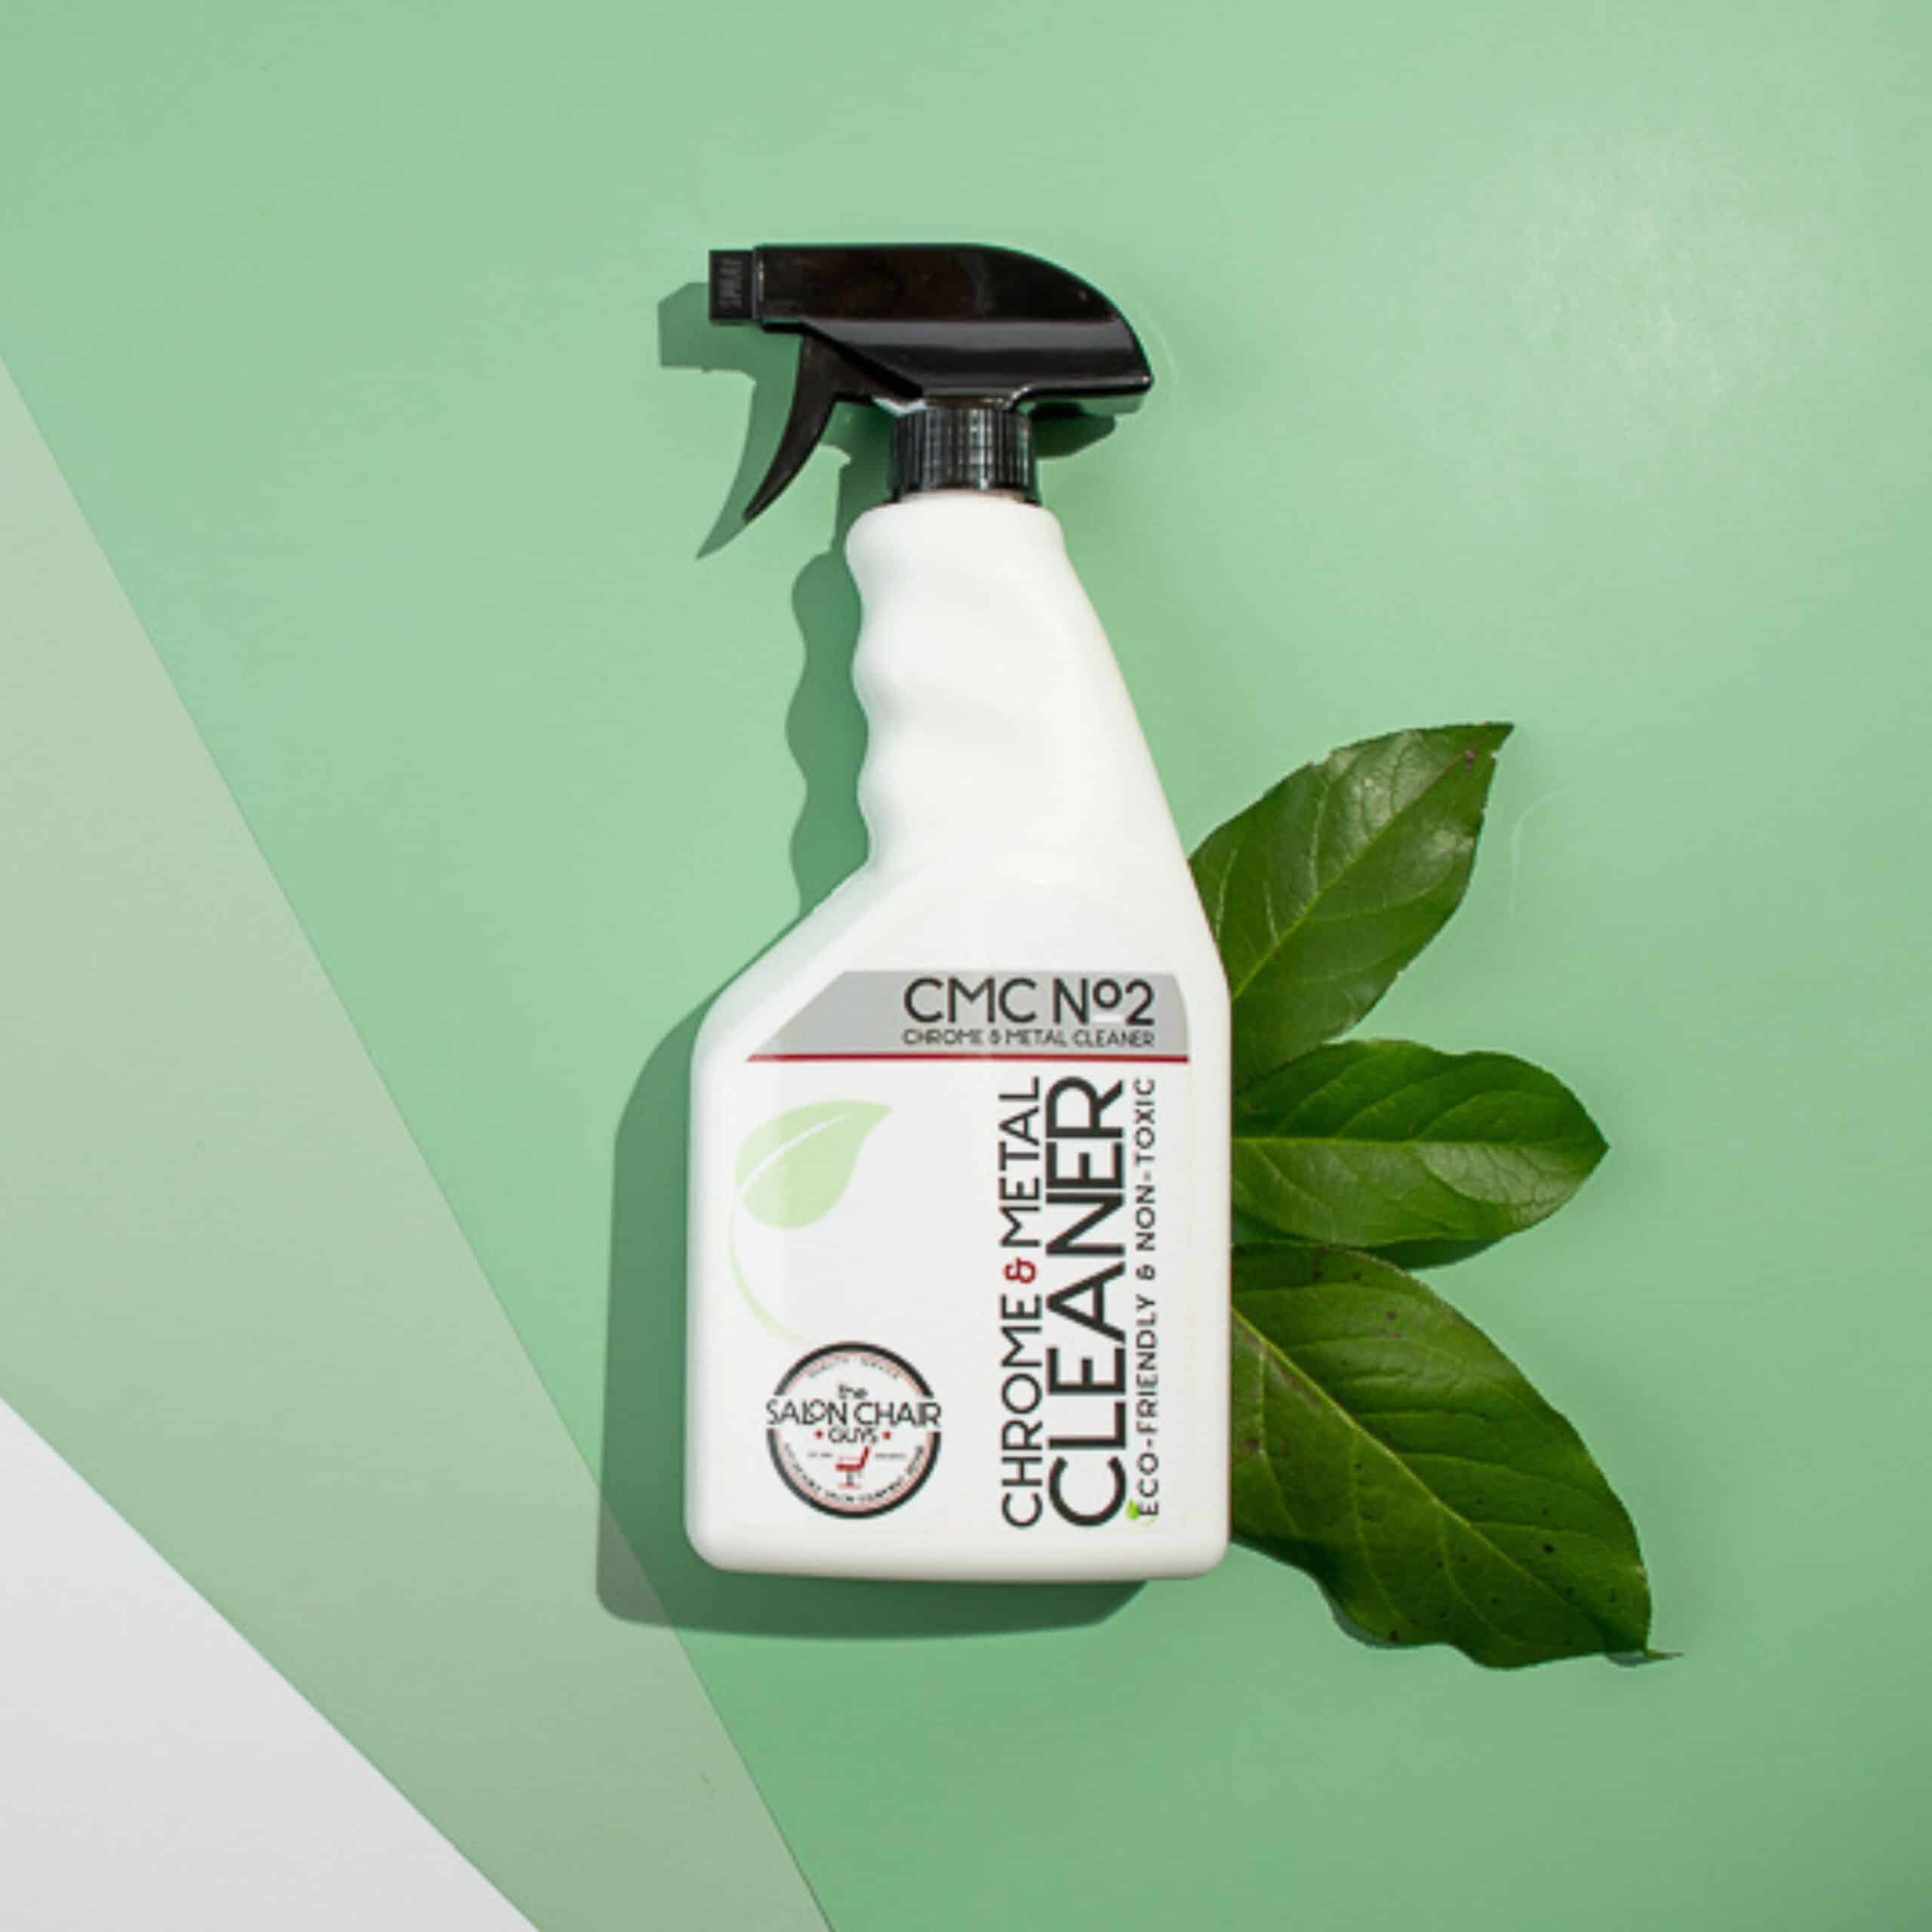 Cleaner Chrome Chrome Chrome Chrome Chrome Chrome Cleaner Cleaner